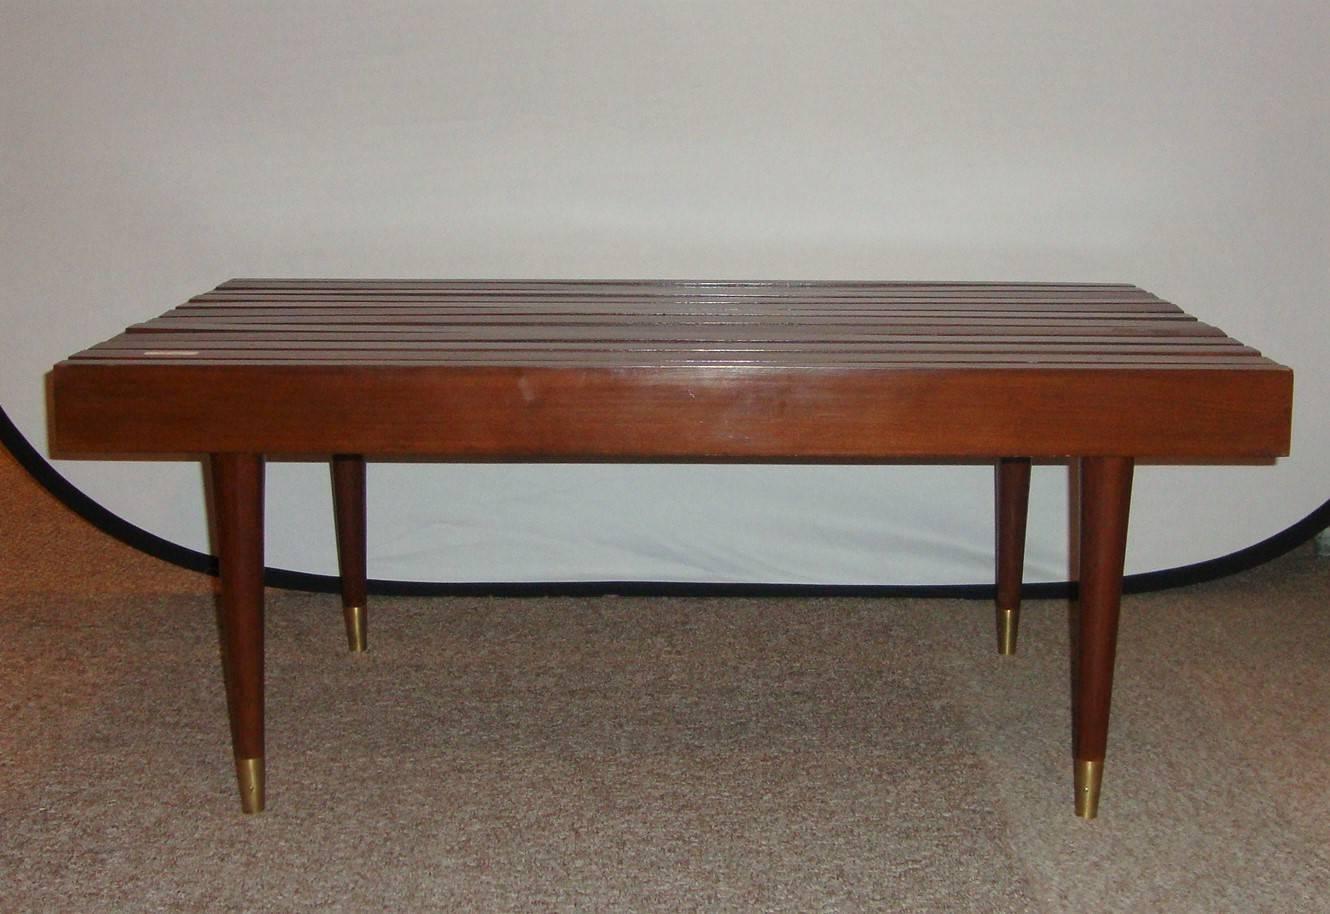 This Herman Miller style, Danish coffee table is the perfect Mid-Century piece to bring into your living room, bedroom, or office for an aesthetically pleasing coffee table.